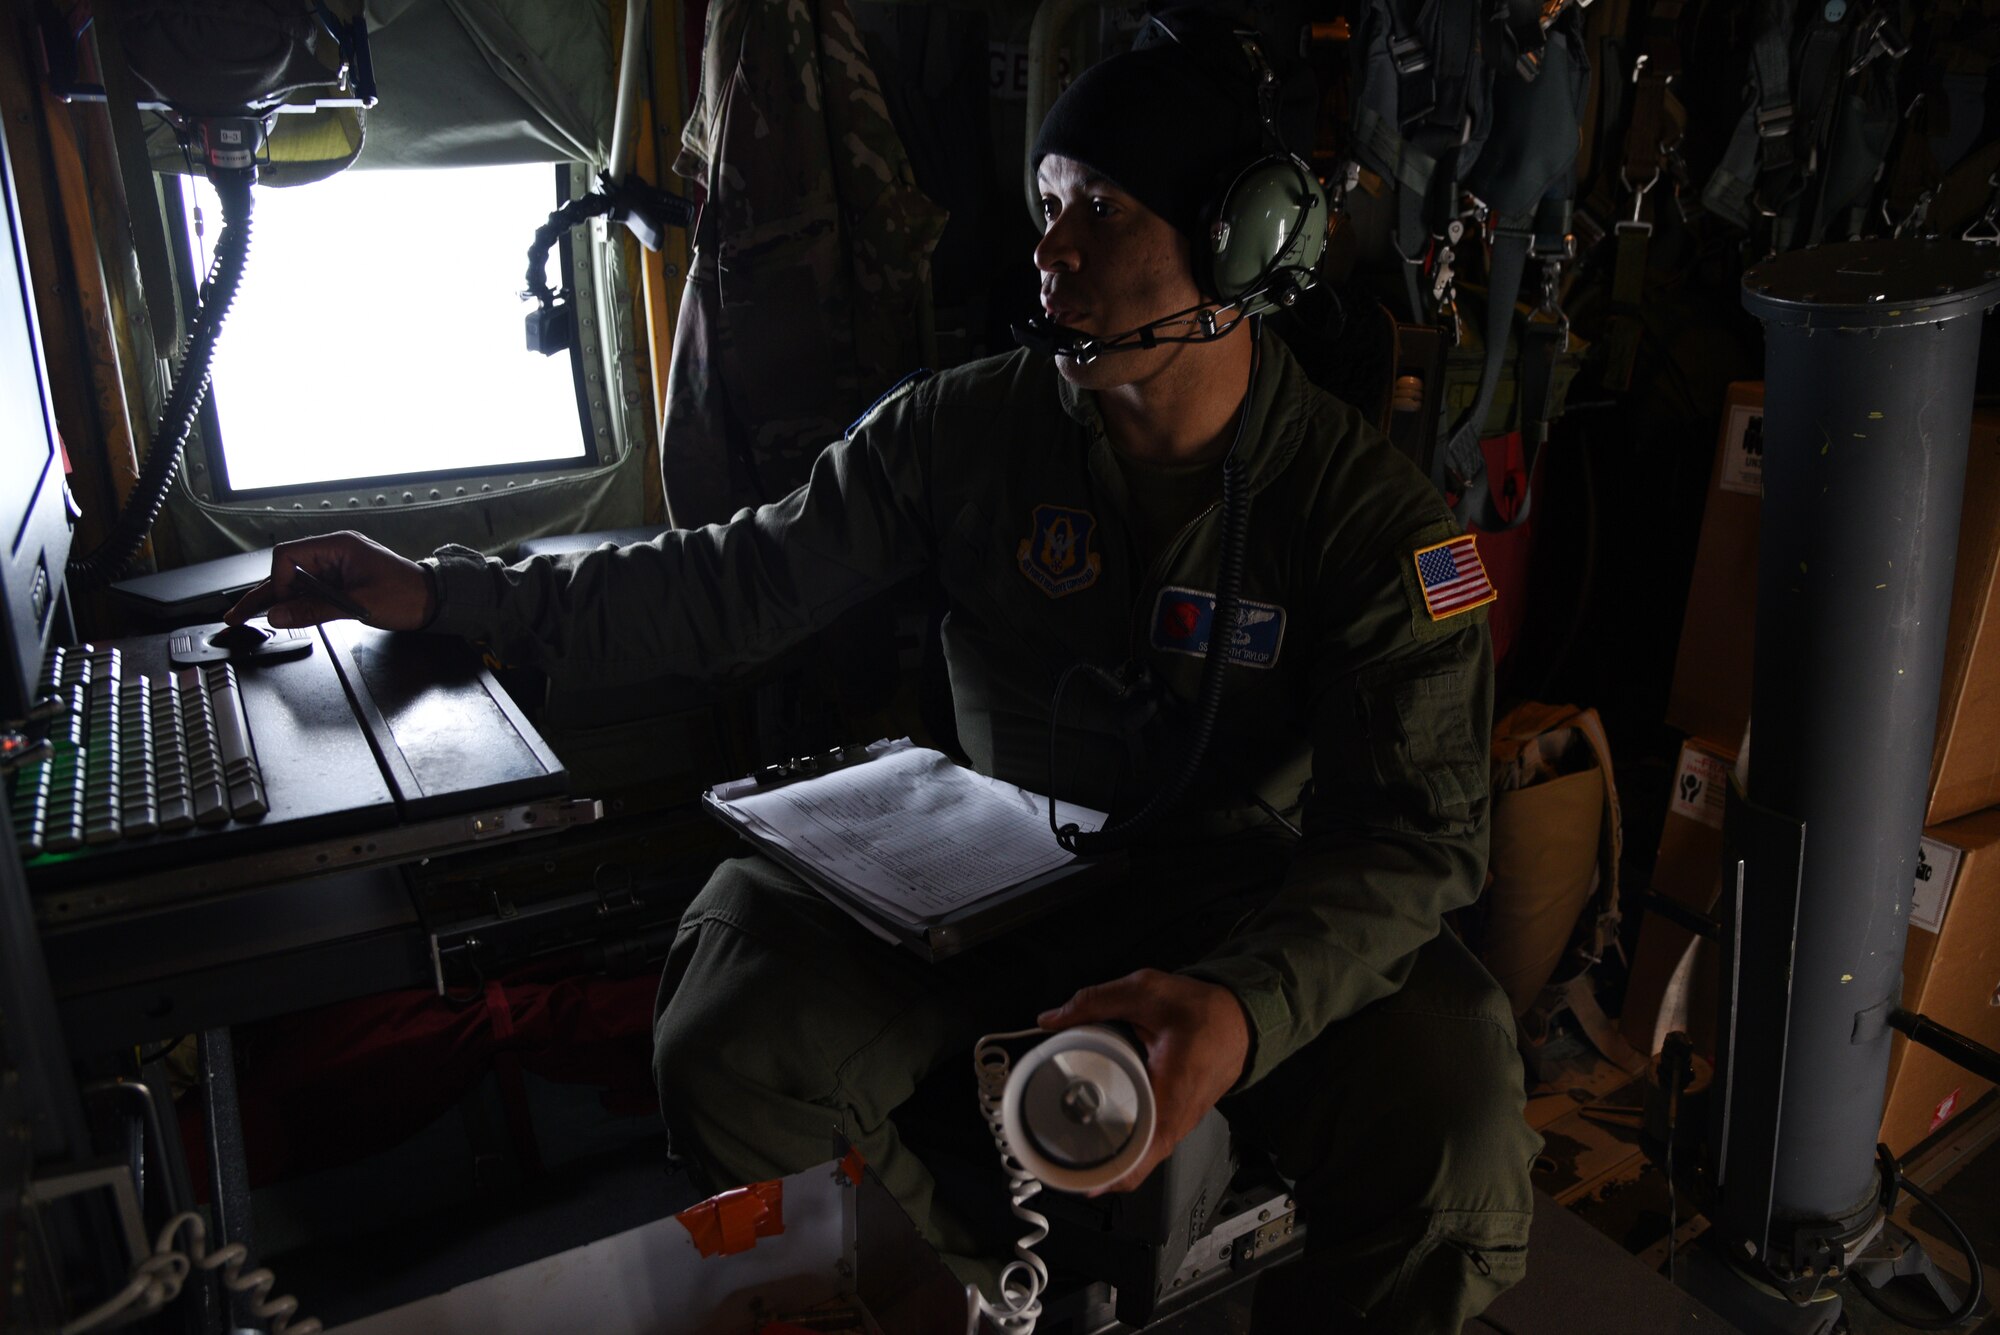 Staff Sgt. Keith Taylor, 53rd Weather Reconnaissance Squadron loadmaster, prepares dropsondes for the storm as the Hurricane Hunters fly into Hurricane Sam, Sept. 27, 2021.  Hurricane Sam had downgraded to a category 3 hurricane when the AF Reserve Hurricane Hunters entered, but was intensifying before they headed back. The Hurricane Hunters gather data weather data from dropsondes and aircraft sensors, which is given to the National Hurricane Center to assist them with their forecasts and storm warnings. (U.S. Air Force photo by Jessica L. Kendziorek)